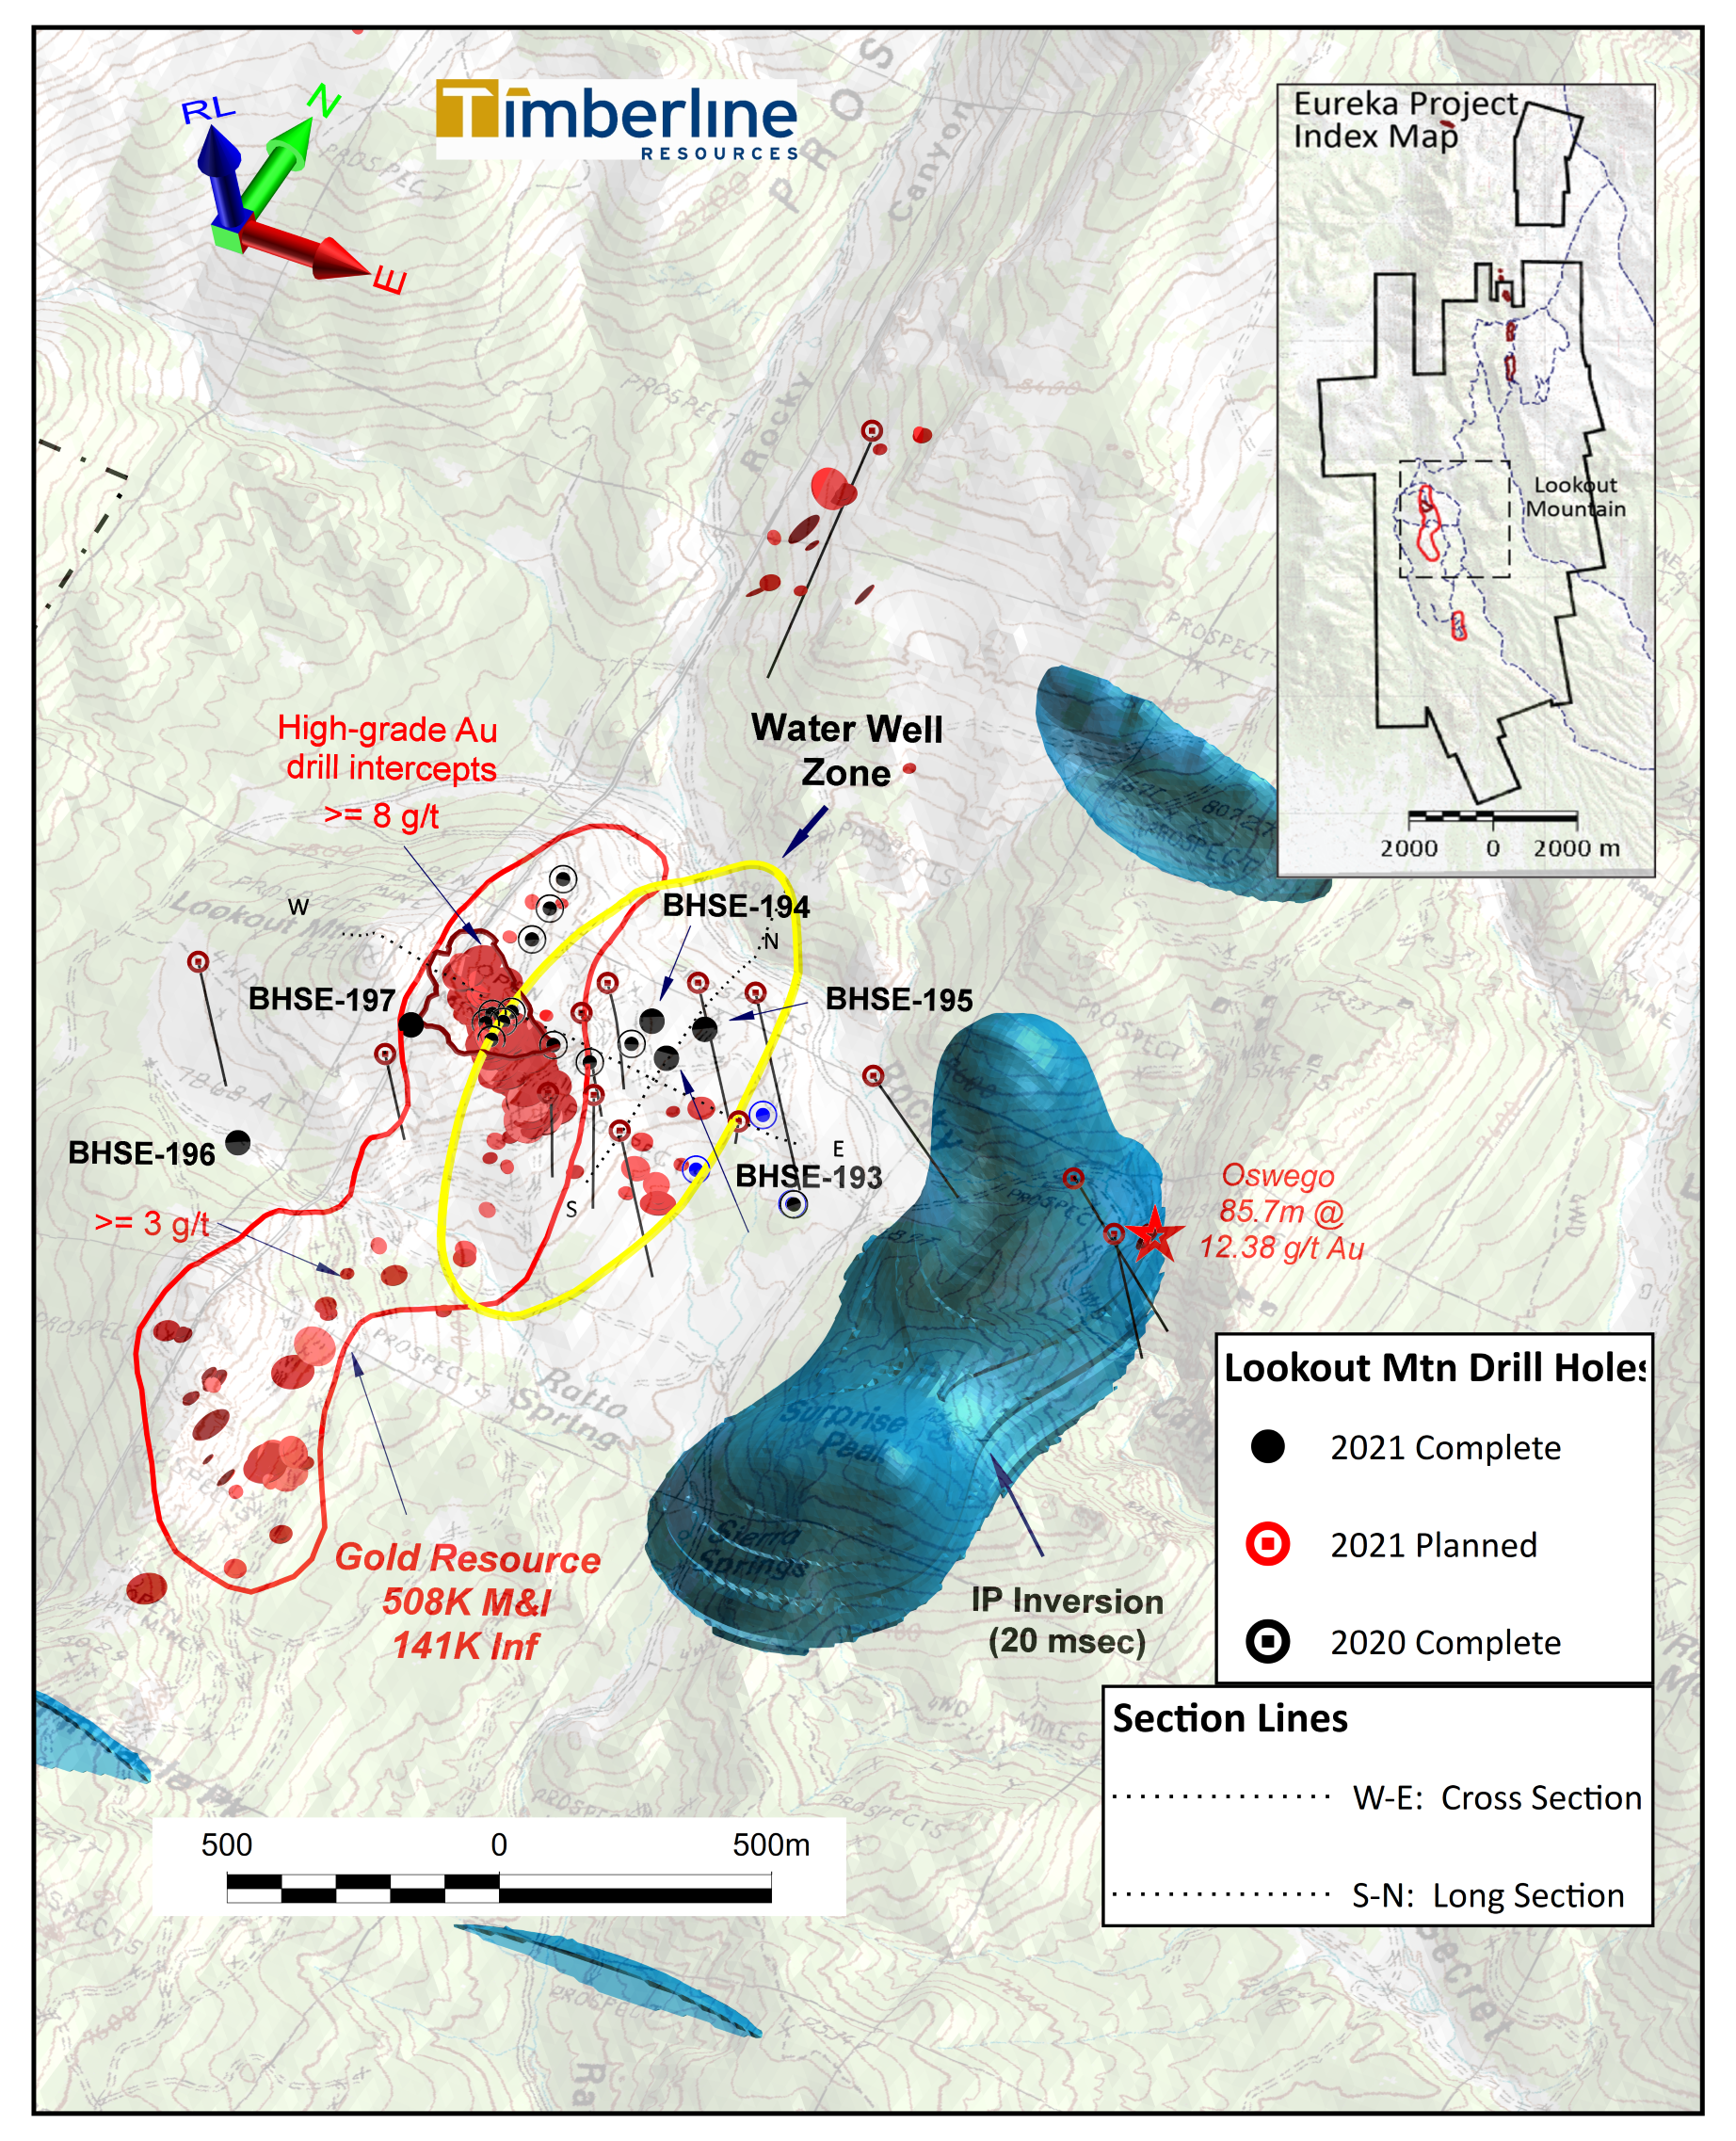 Figure 1. Lookout Mountain Resource Area and Nearby Targets